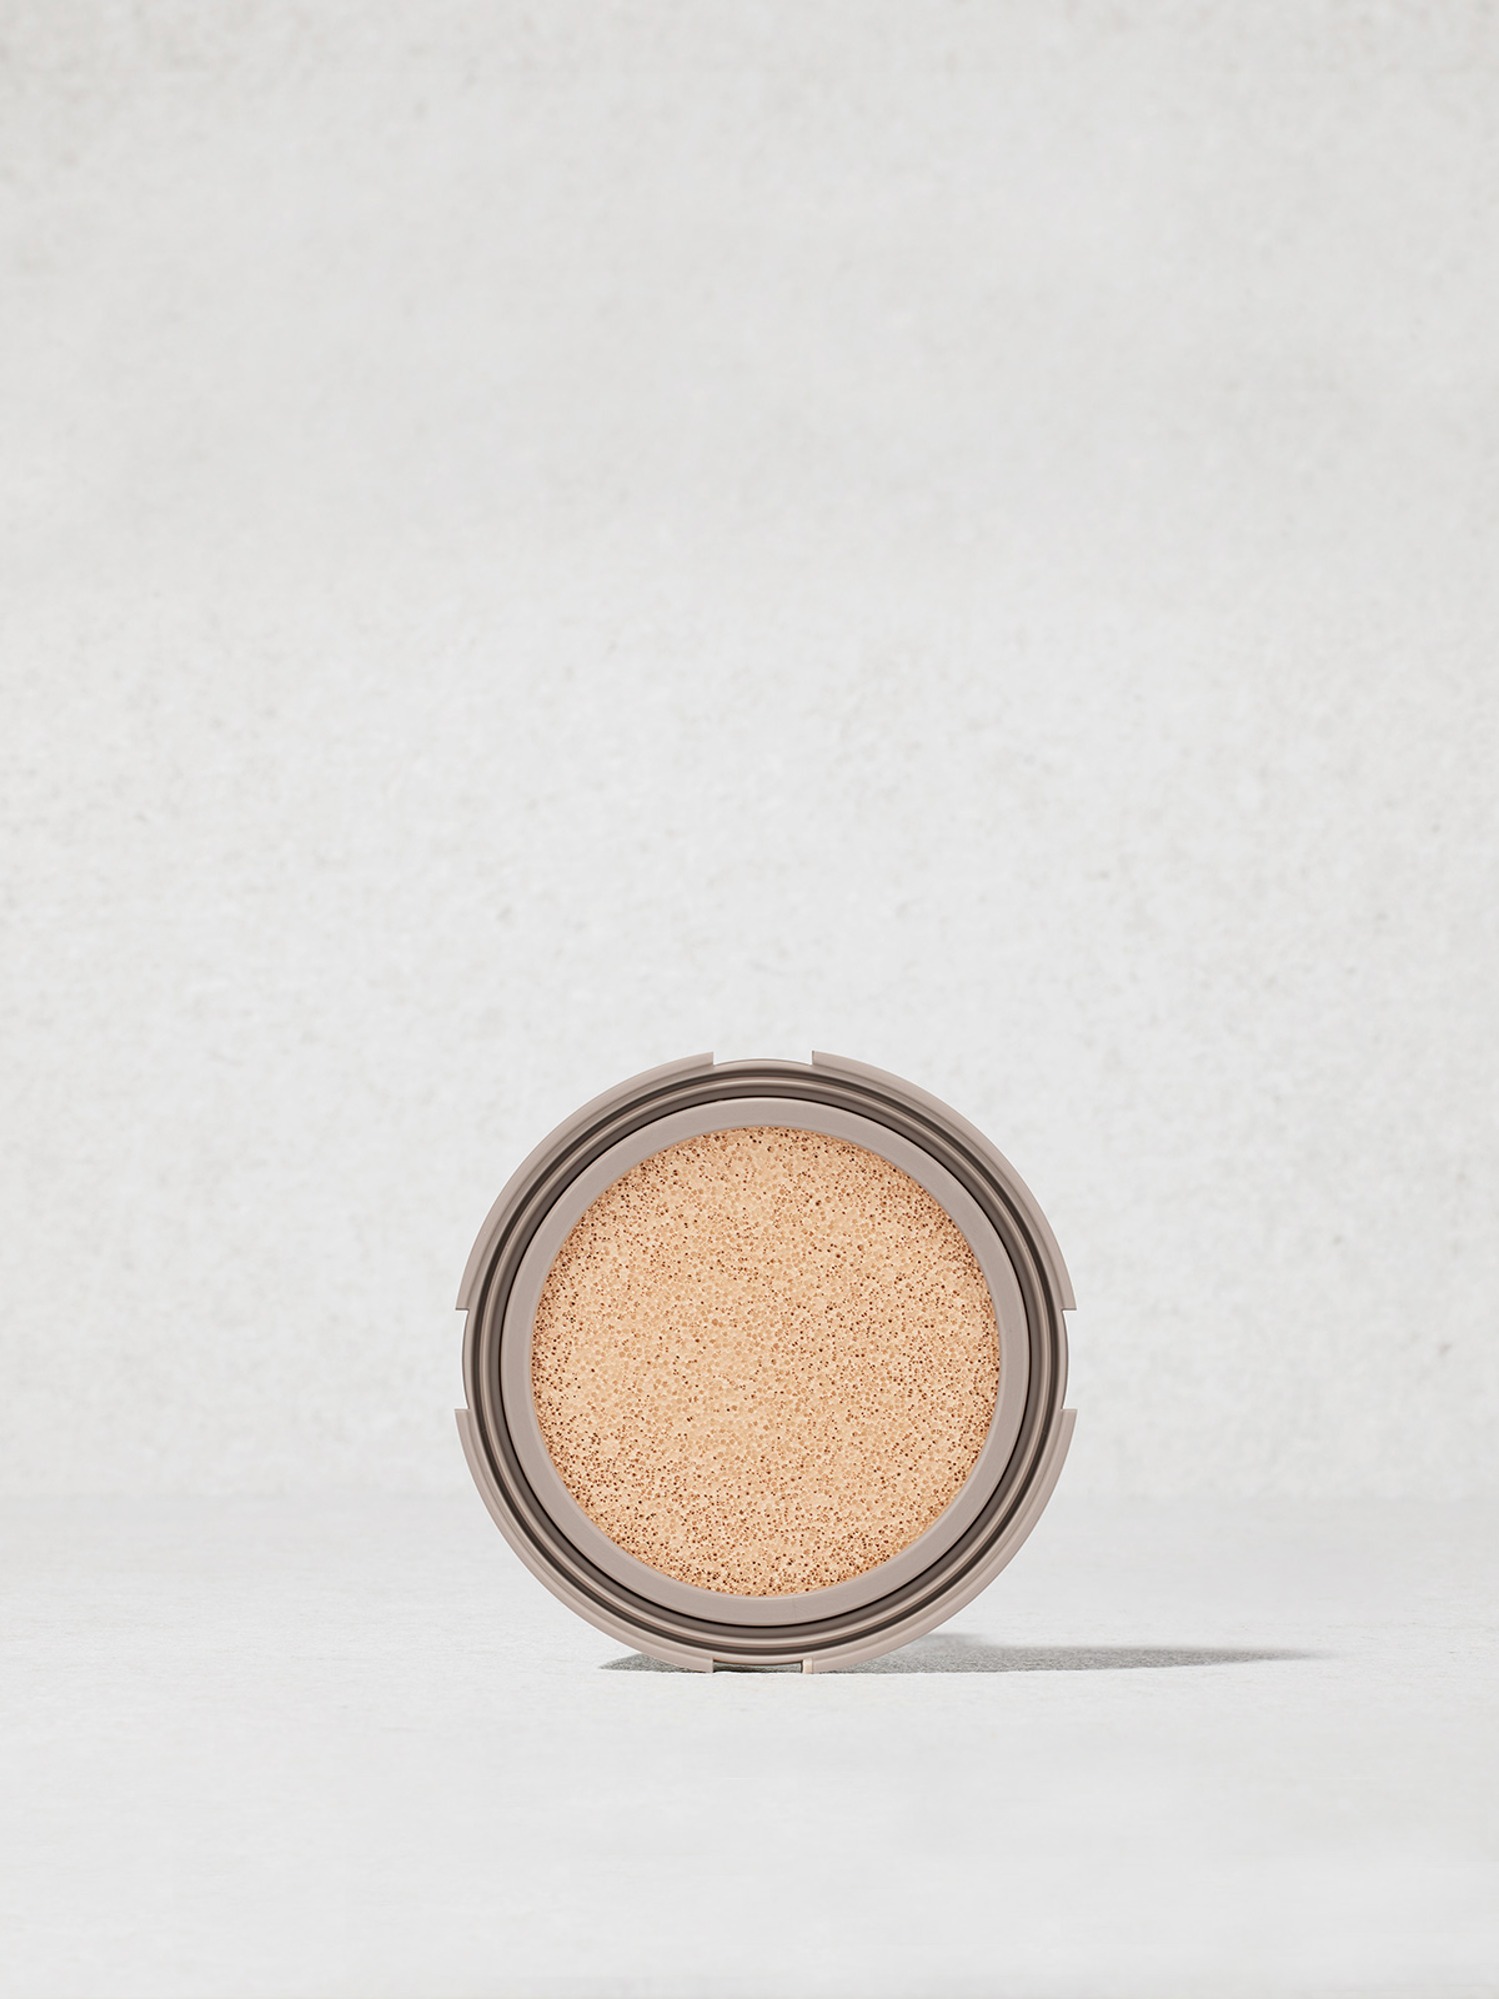 CONSCIOUS FIT CUSHION FOUNDATION REFILL 12g